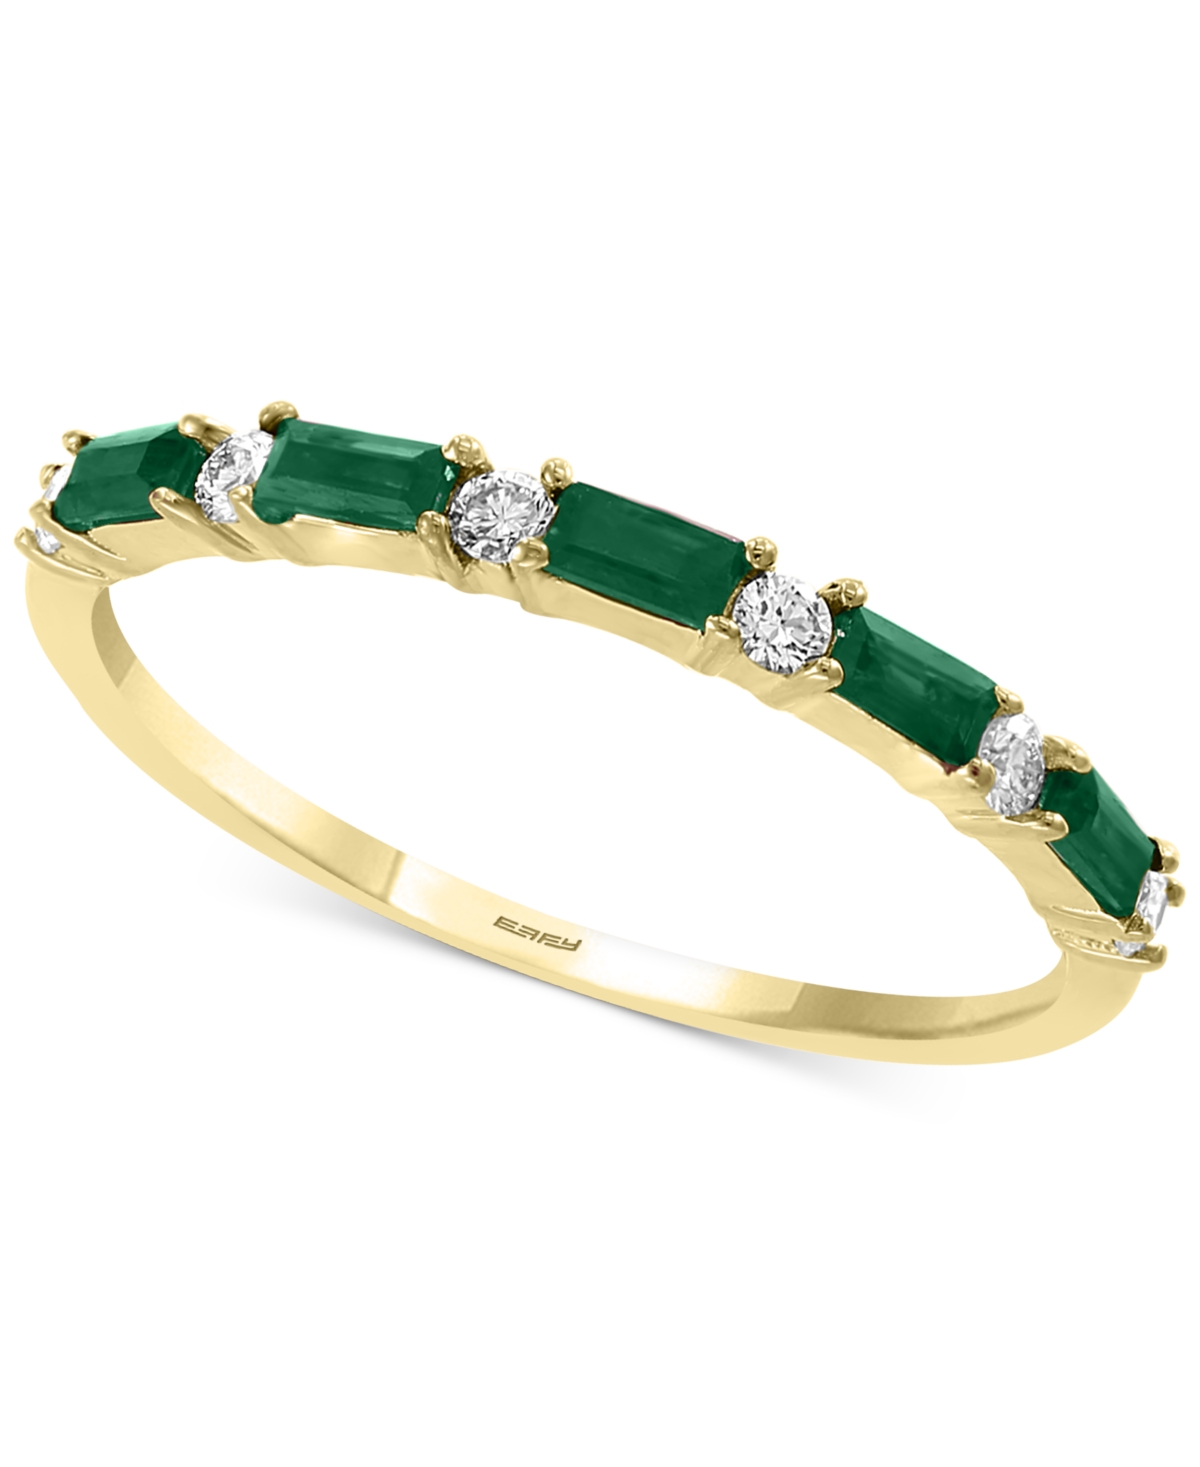 Effy Sapphire (1/3 ct. t.w.) & Diamond (1/8 ct. t.w.) Stacking Ring in 14k White Gold (Also Available in Emerald) - Emerald